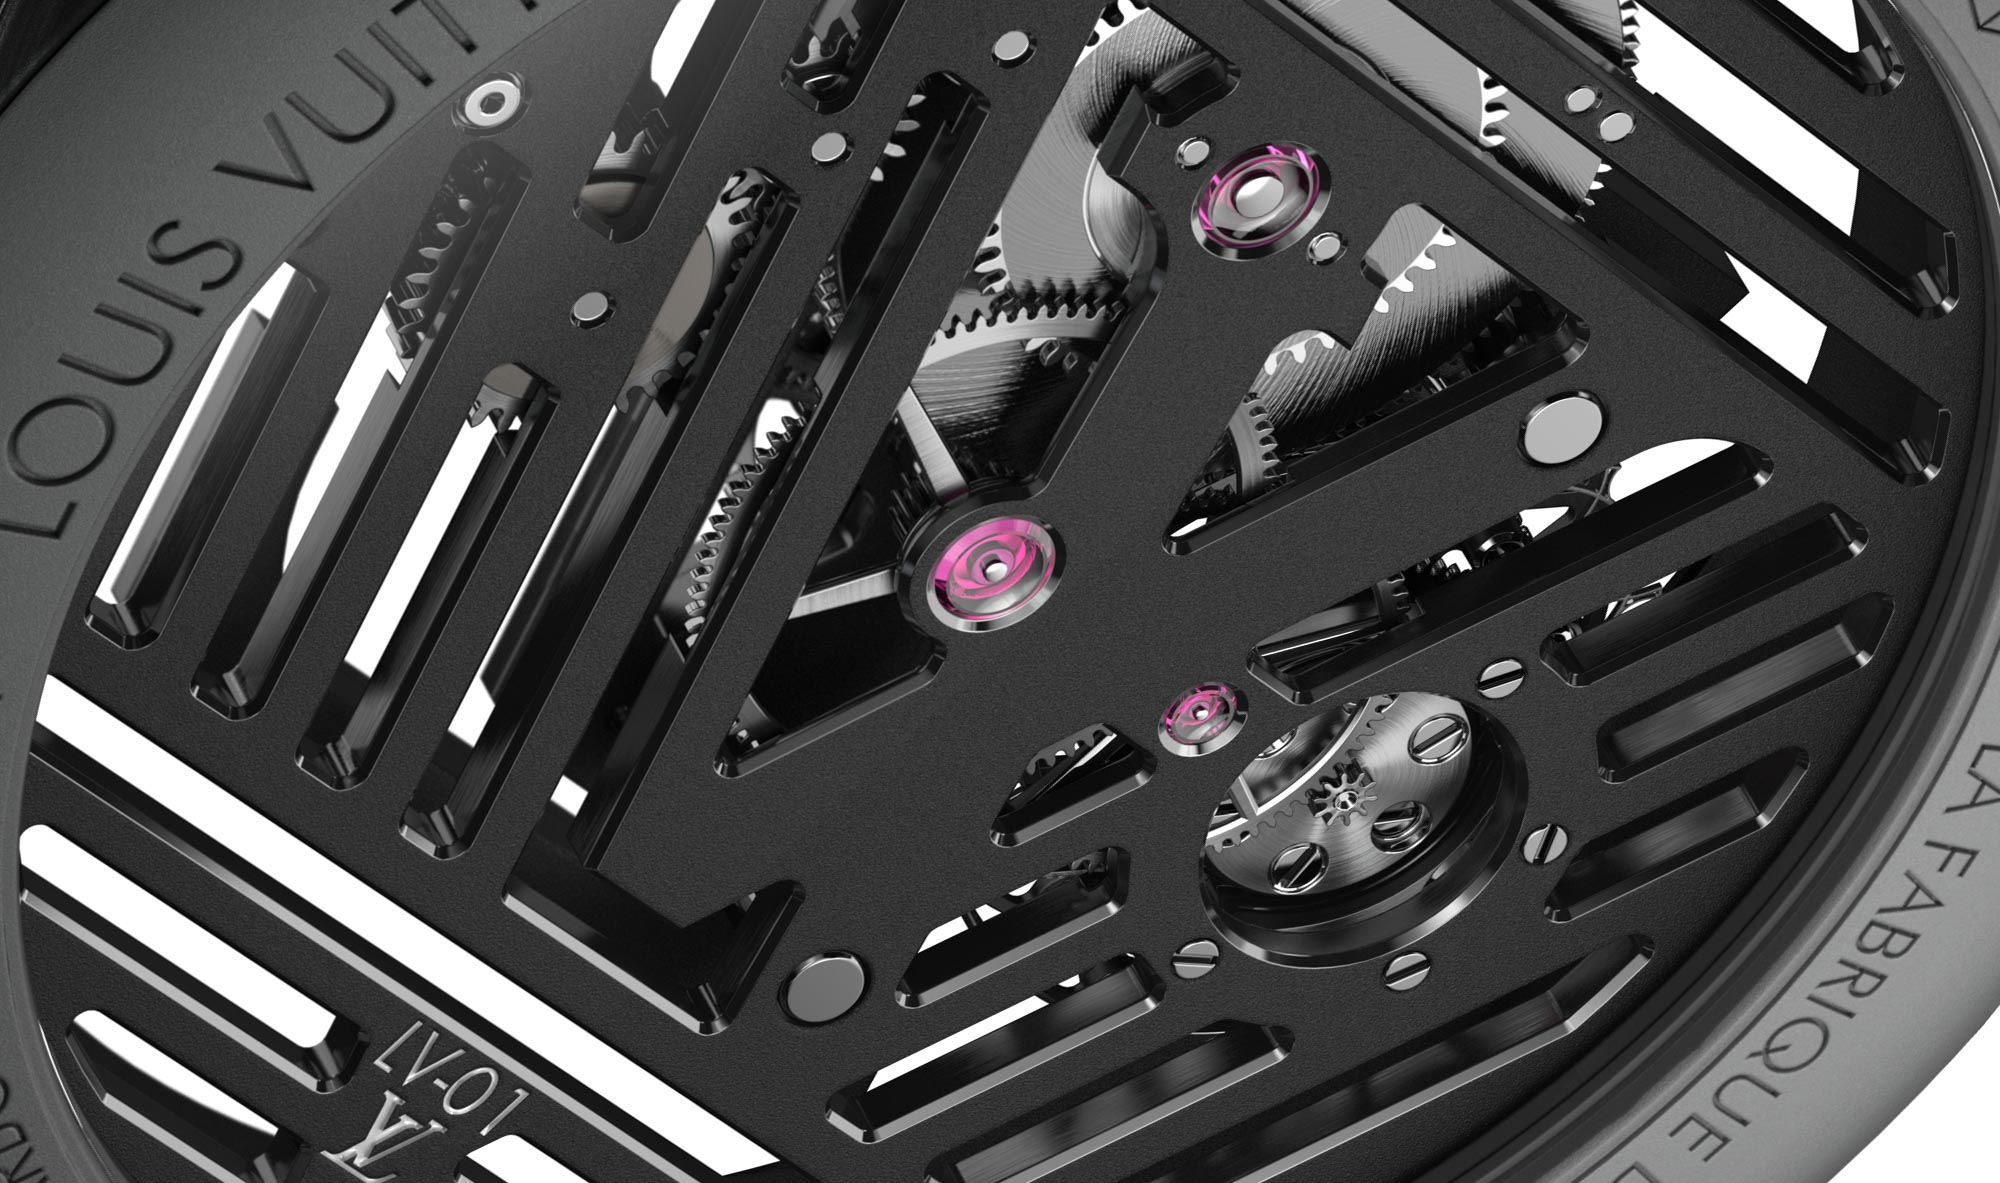 W&W 2021: Louis Vuitton Tambour Curve GMT Flying Tourbillon with In-House  Automatic Movement — WATCH COLLECTING LIFESTYLE